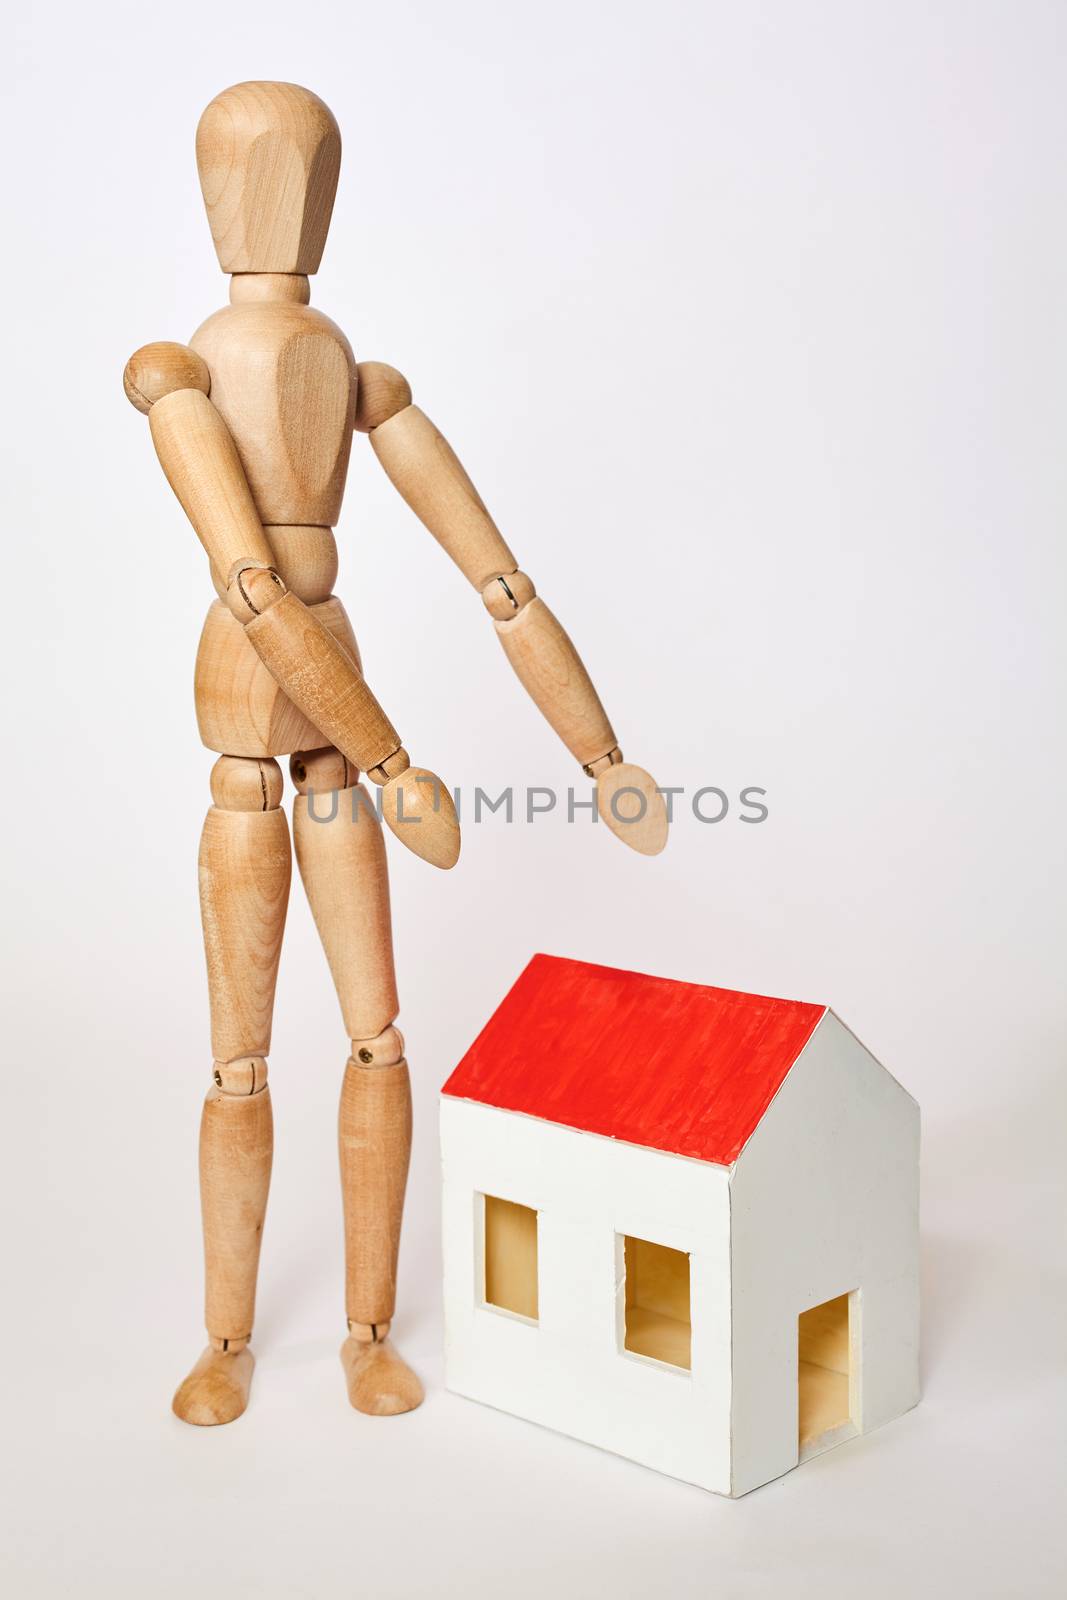 Dummy propose small house on white background